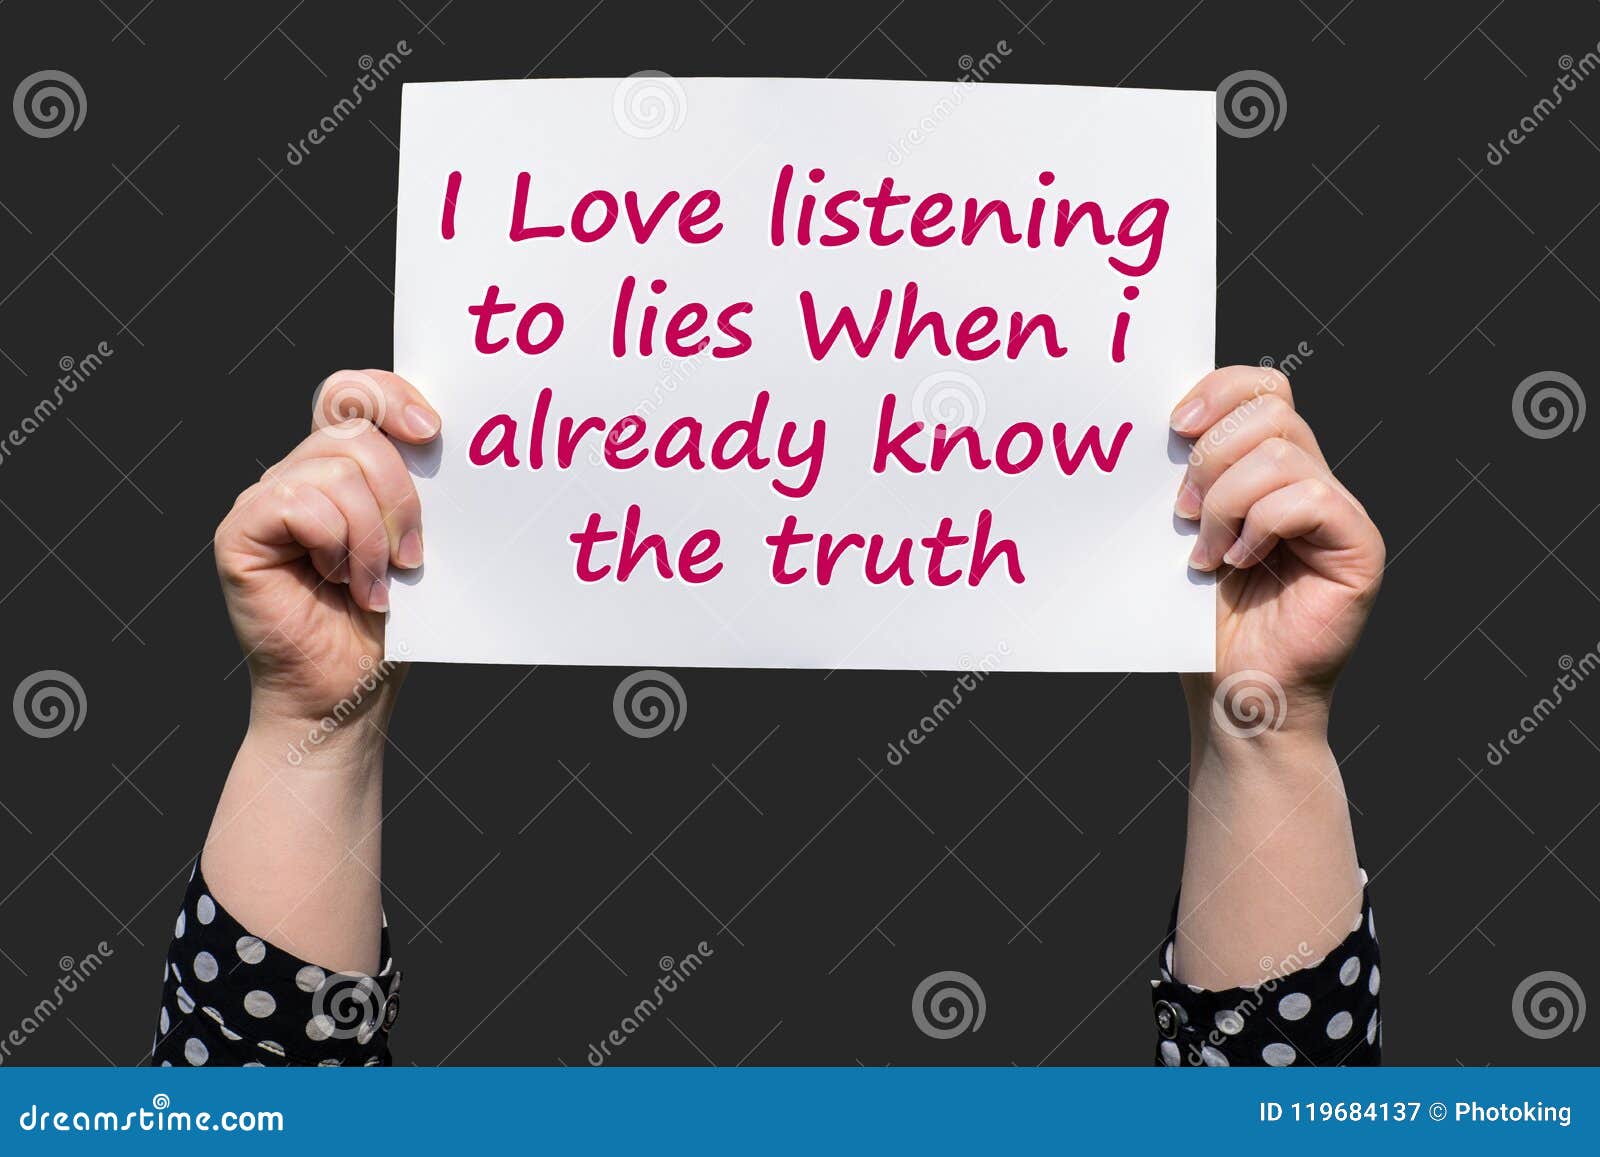 i love listening to lies when i already know the truth